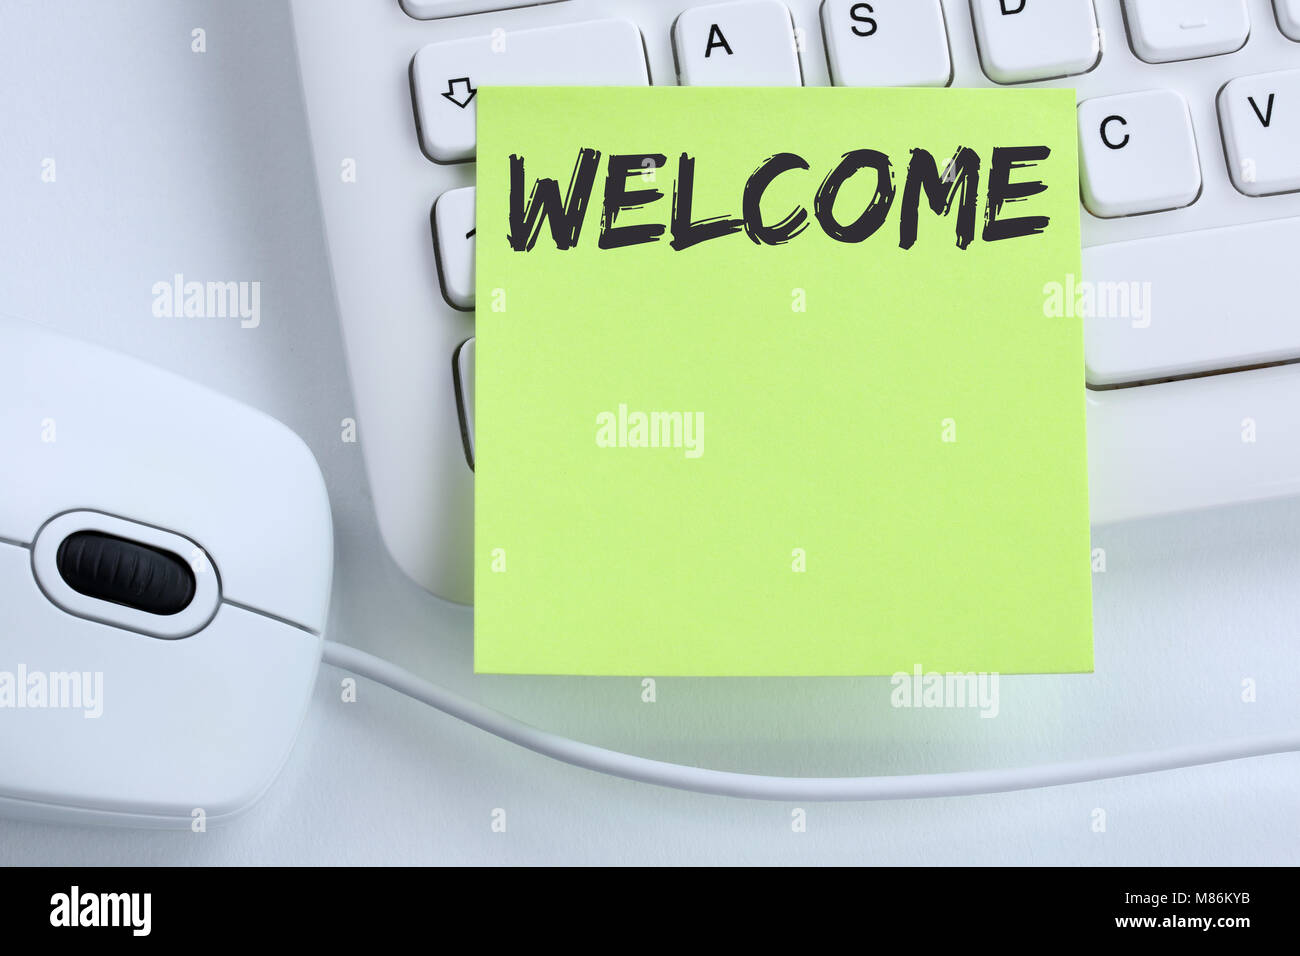 Welcome new employee colleague refugees refugee immigrants computer business concept mouse desk keyboard Stock Photo